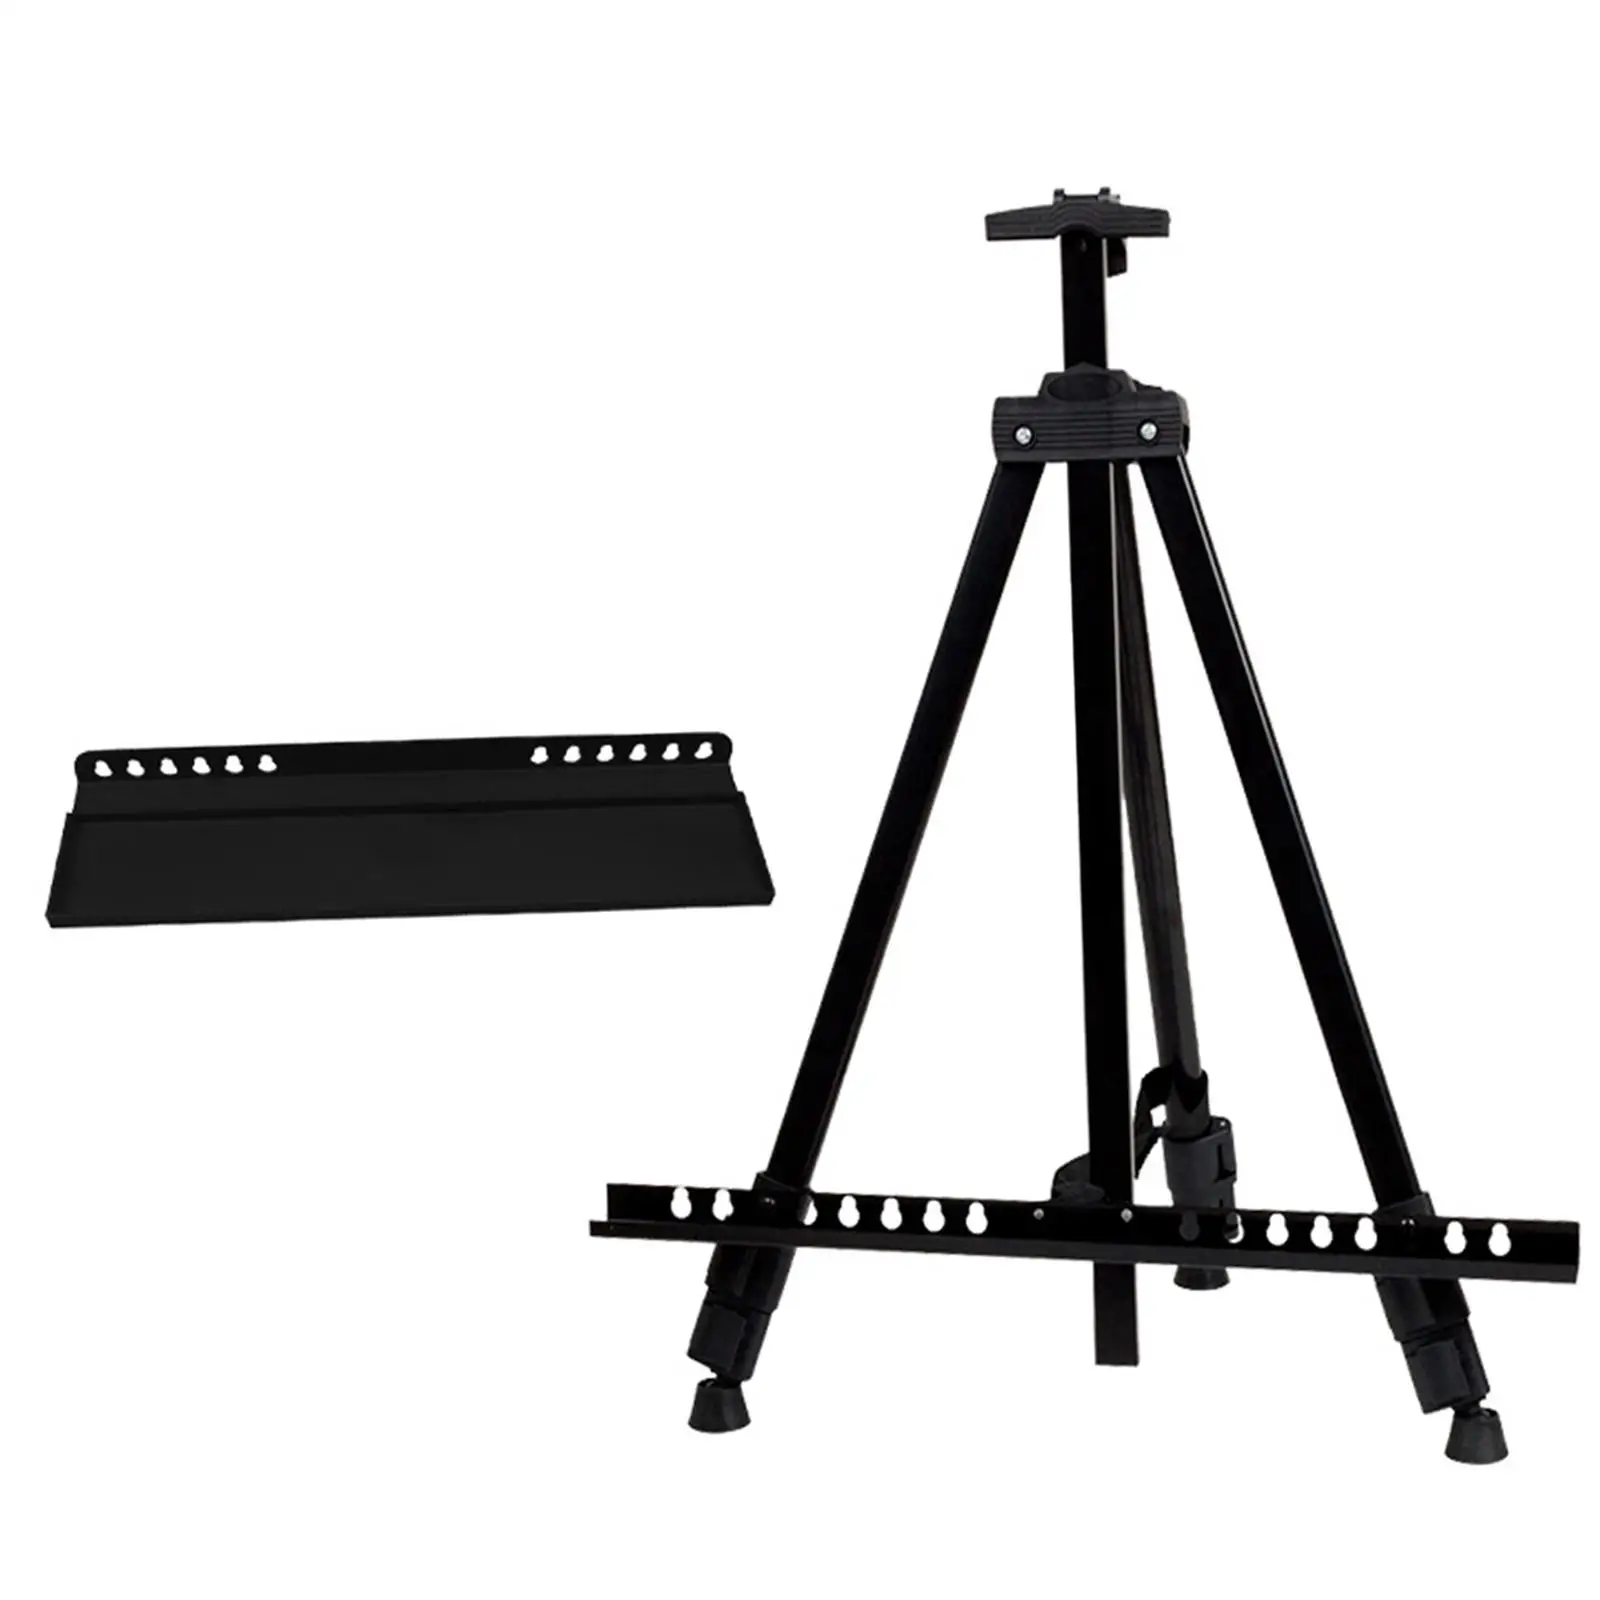 1 Piece Folding Easel Alloy Material Sturdy Collapsible Adjustable Display for Canvases